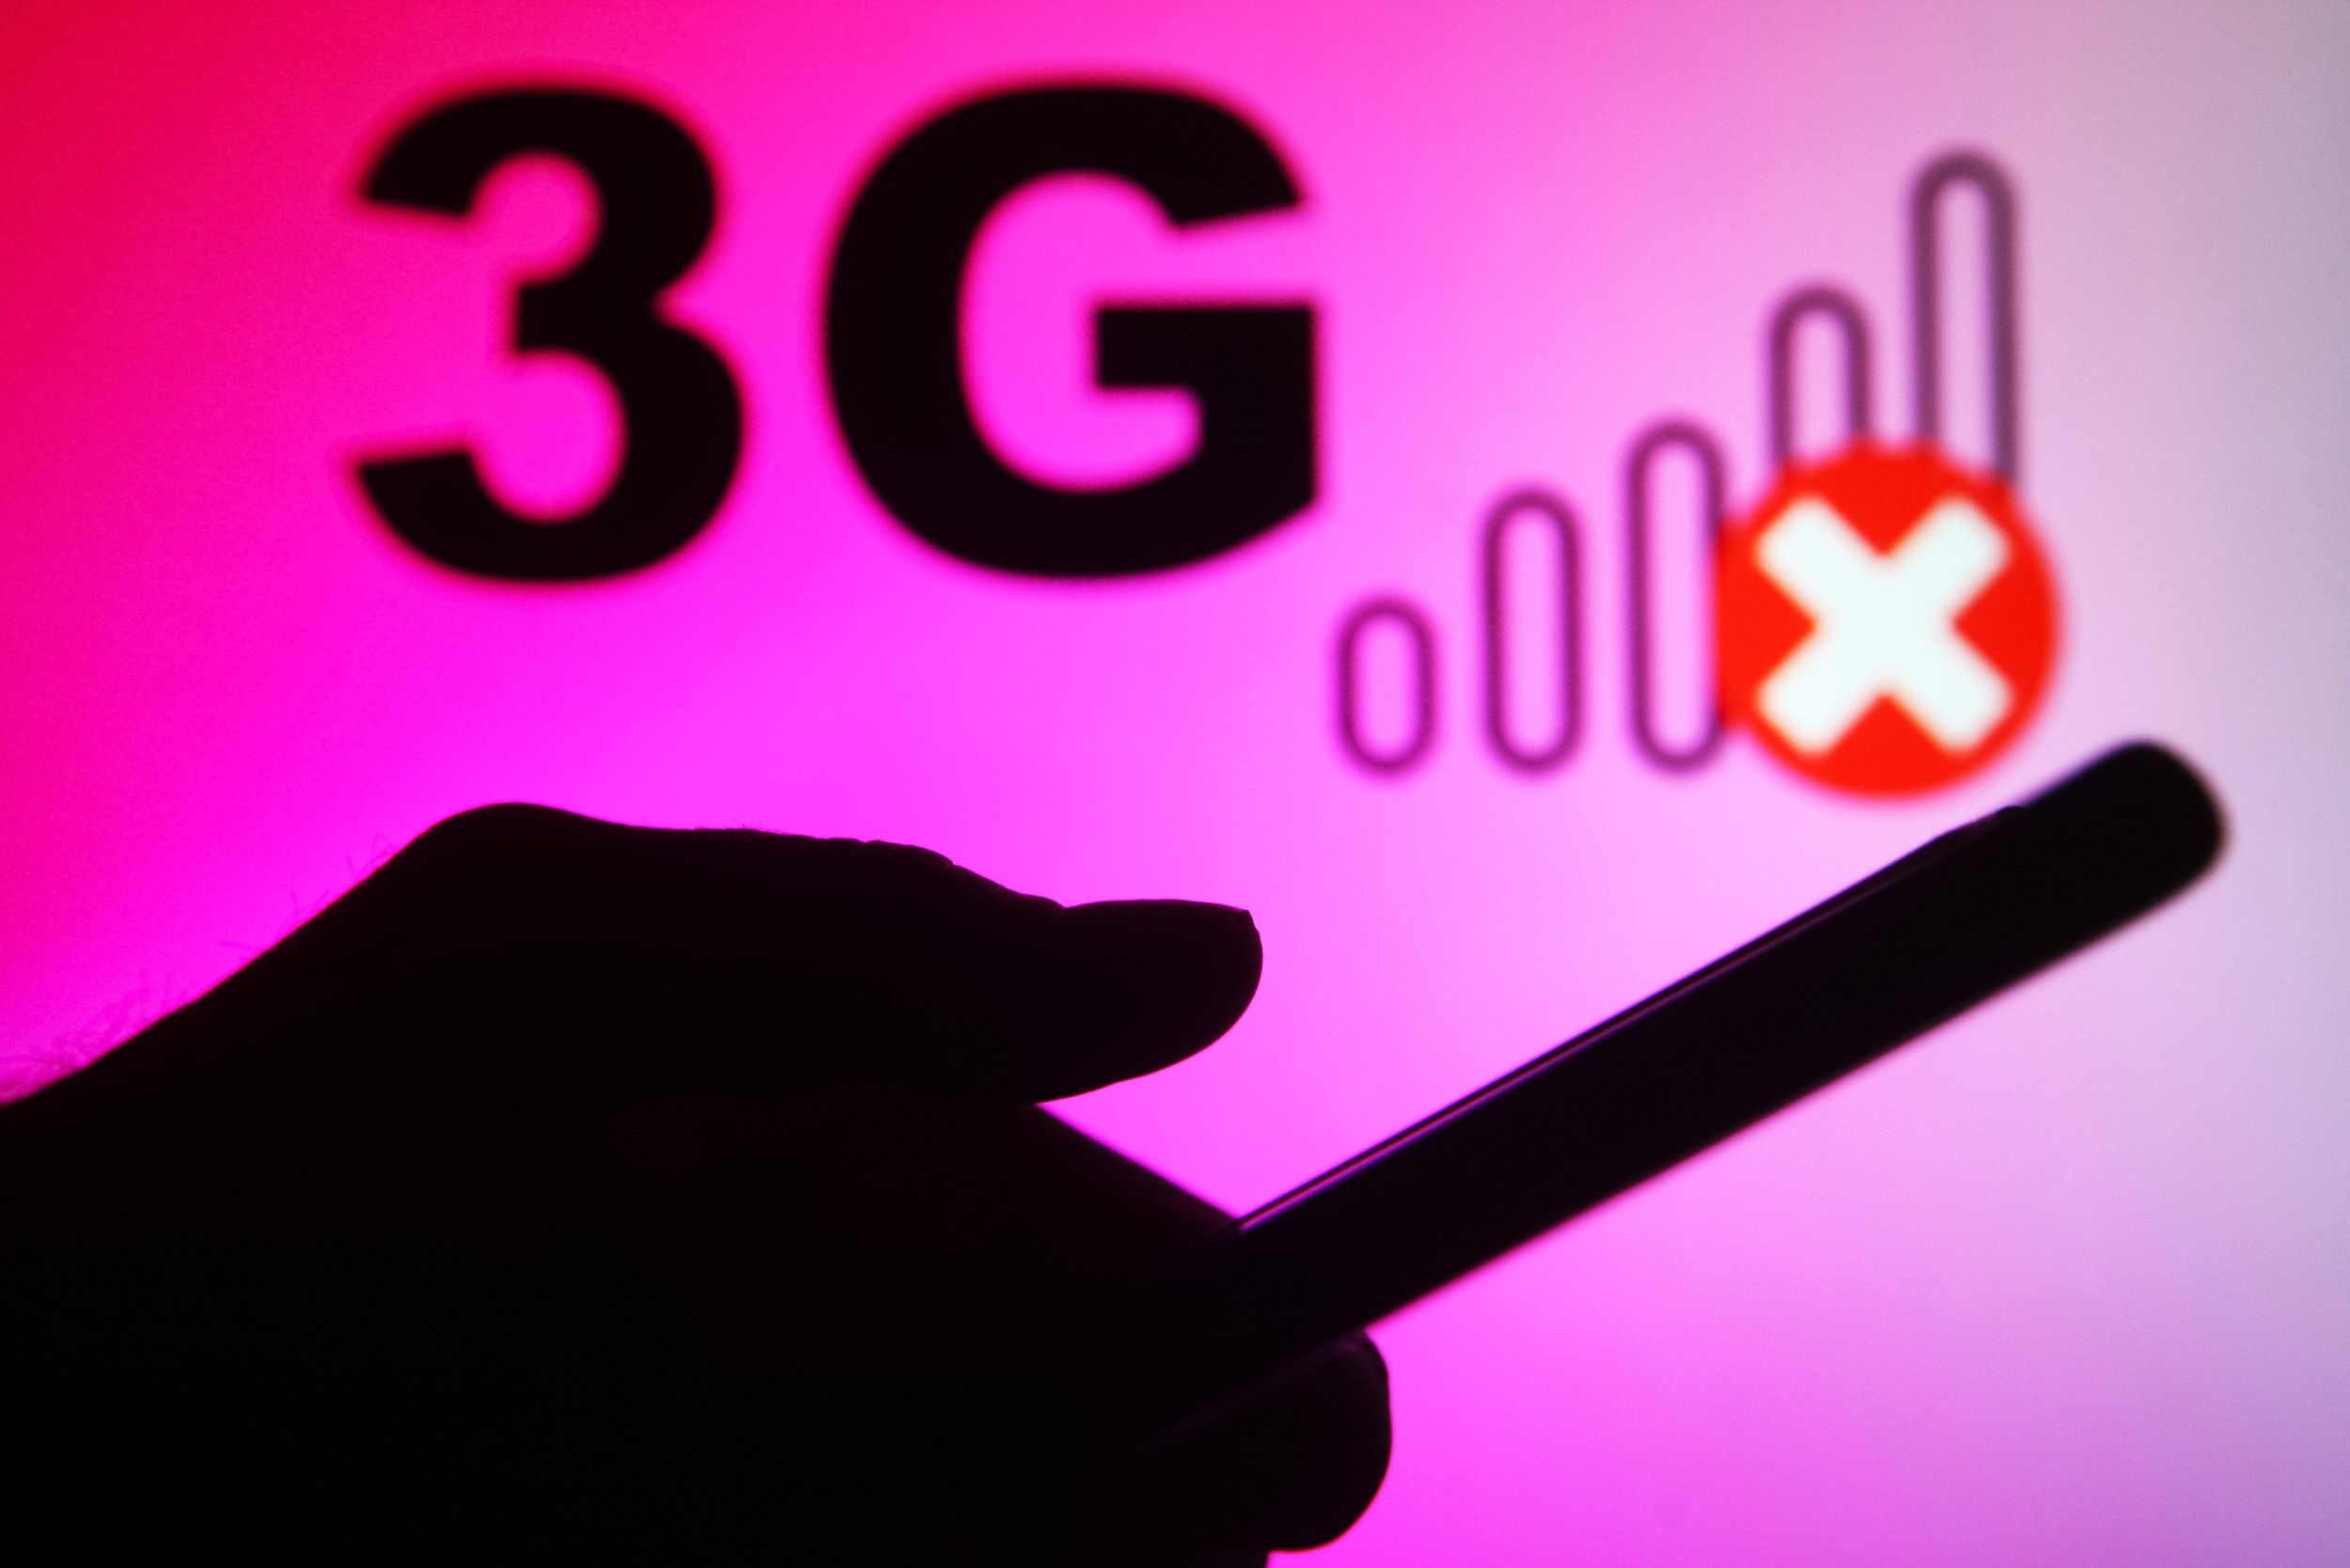 Silhouette of a hand holding a phone in front of a pink backdrop that says 3G and has empty bars to indicate no signal. 